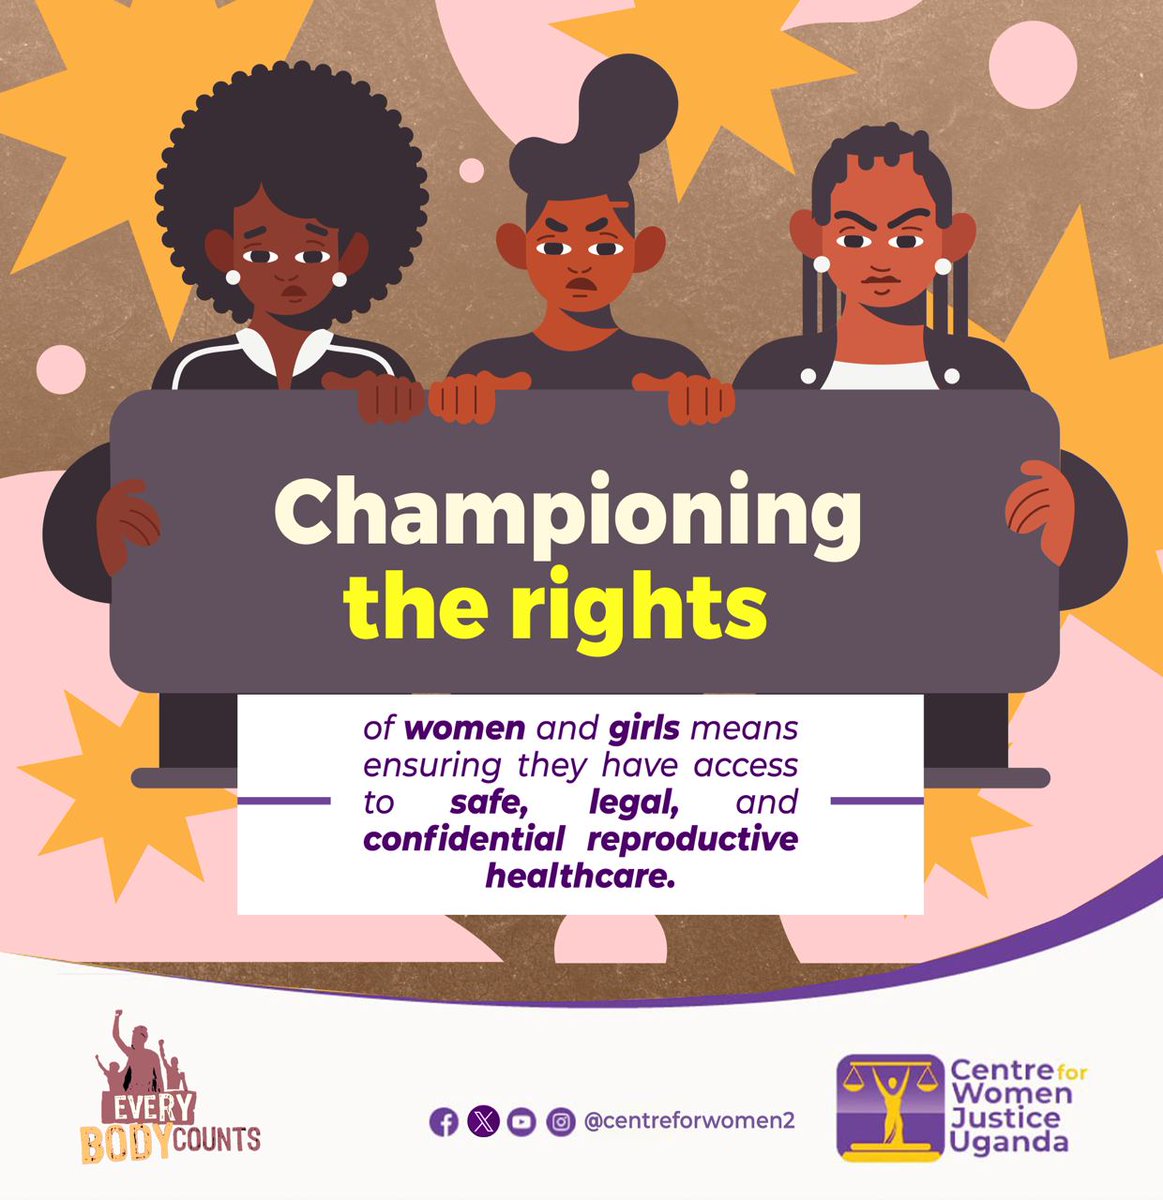 It's only when we collectively agree to champion the rights of all human beings that autonomy and body integrity will be realized. Tukolele wamu okutukiriza kino.🤝🏿 #CentreforWomenJusticeUganda